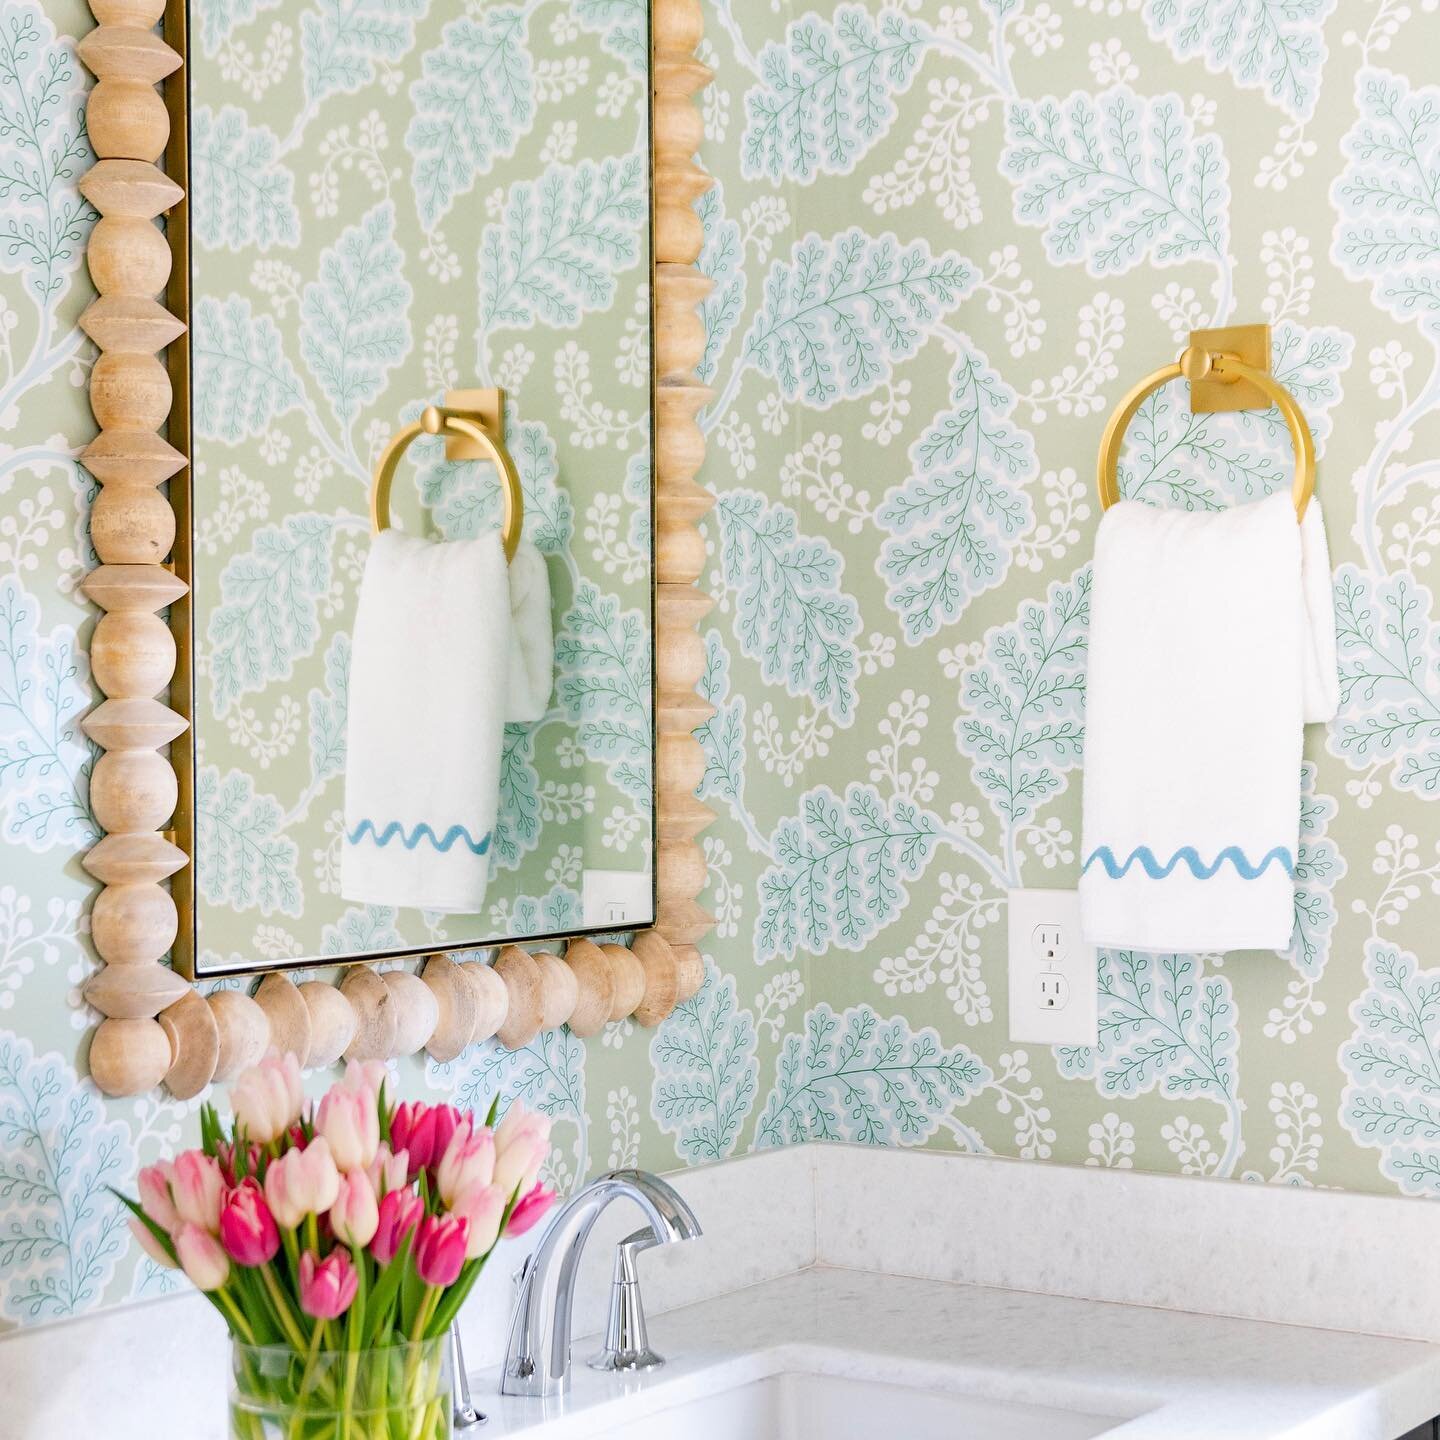 Bloom with good vibes ✌🏻Happy first day of spring!🌸🌼🌸
&bull;
&bull;
&bull;
&bull;
📸: @kristinelizabethstudio

#francesclaireinteriors #livebeautifully #interiordesign #interiordesigner #lasvegashomedesign #lasvegashomes #traditionalhome #mytradh